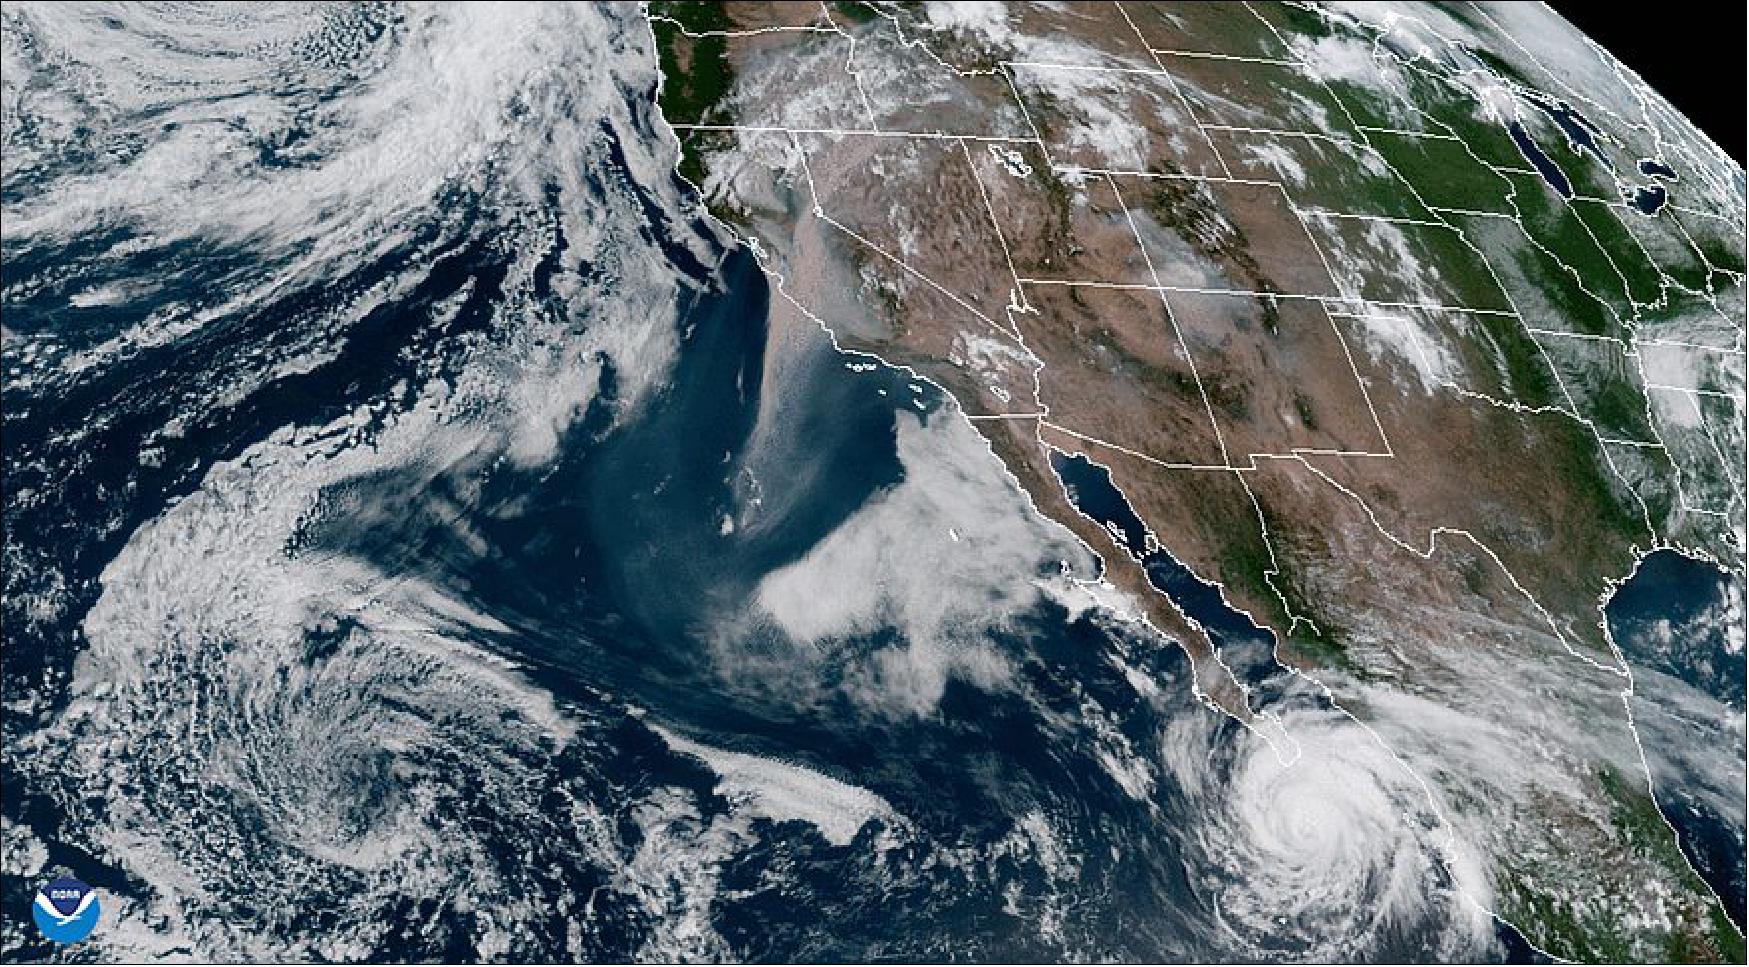 Figure 33: NOAA’s GOES-West satellite (GOES-17) captured the above GeoColor image of massive wildfire smoke plumes billowing from California and areas of the Rocky Mountains on Aug. 19, 2020. To the north, a mid-latitude cyclone spins over the Gulf of Alaska while Hurricane Genevieve continues its path toward Baja California (image credit: NOAA)